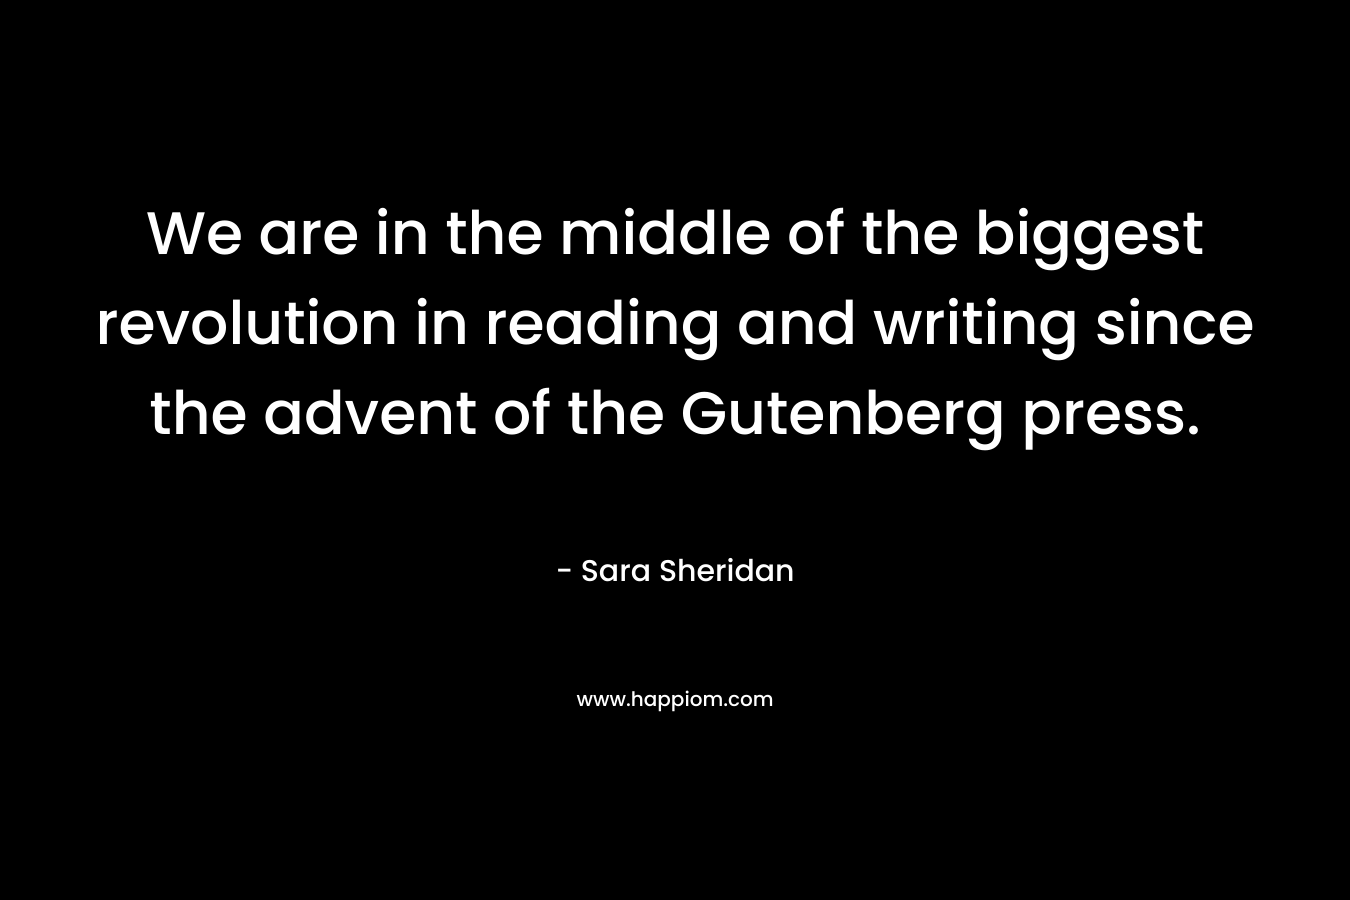 We are in the middle of the biggest revolution in reading and writing since the advent of the Gutenberg press. – Sara Sheridan